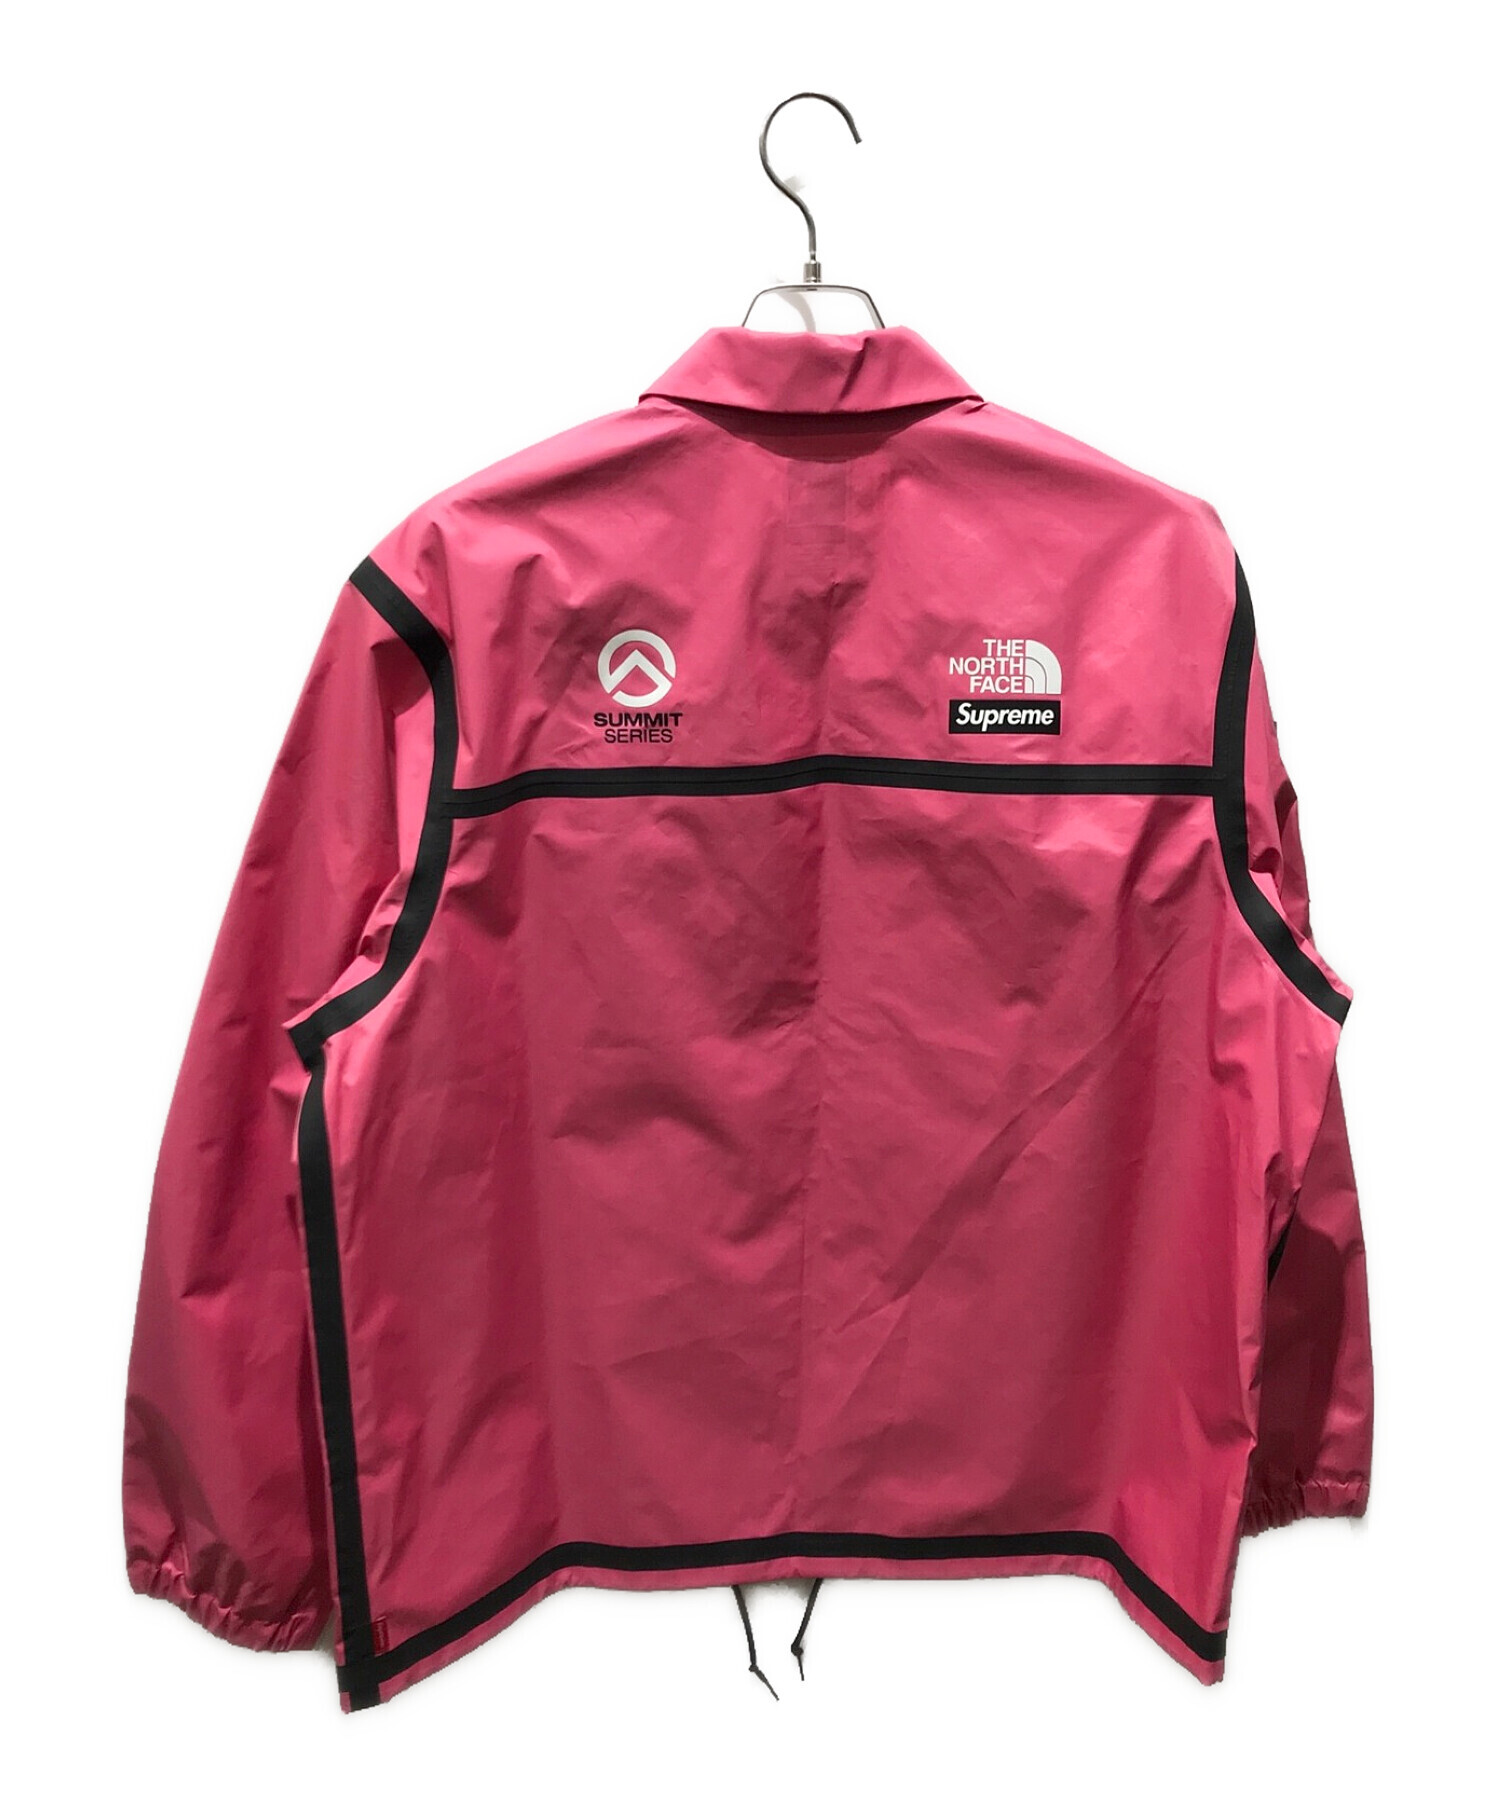 THE NORTH FACE (ザ ノース フェイス) SUPREME (シュプリーム) Outer Tape Seam Coaches Jacket　 NP12100I ピンク サイズ:Ｌ 未使用品